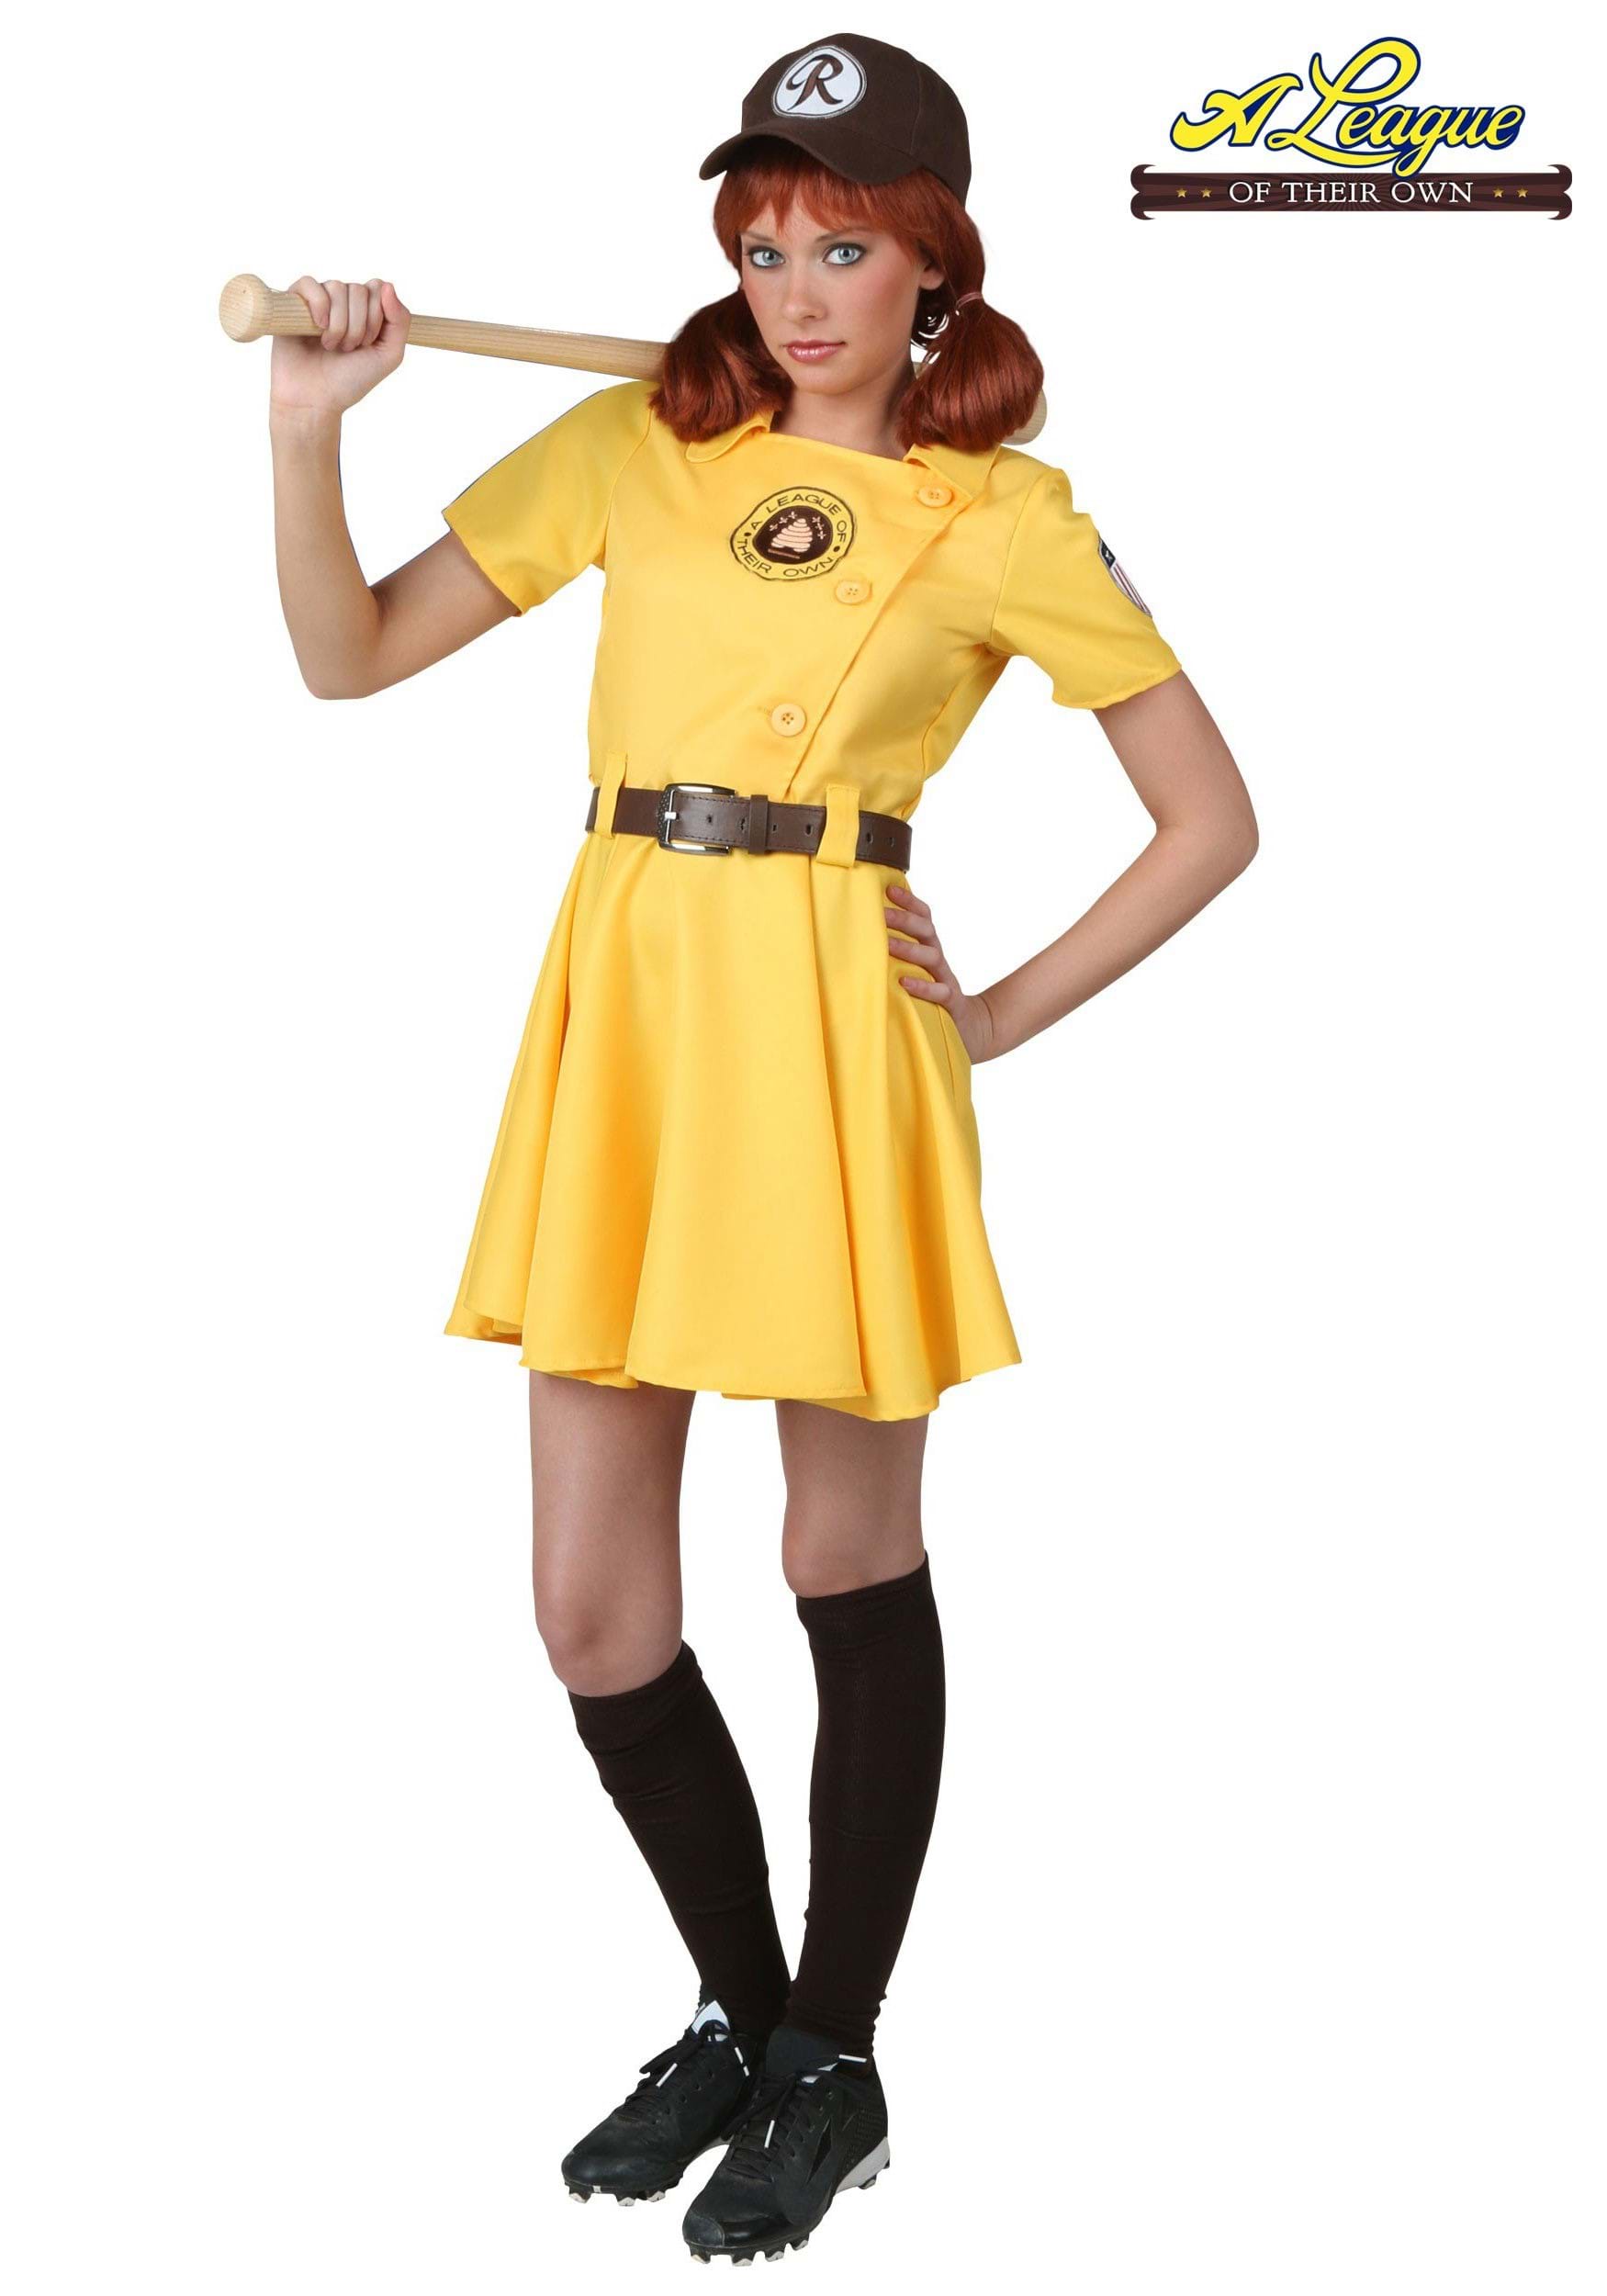 Women’s A League of Their Own Kit Costume